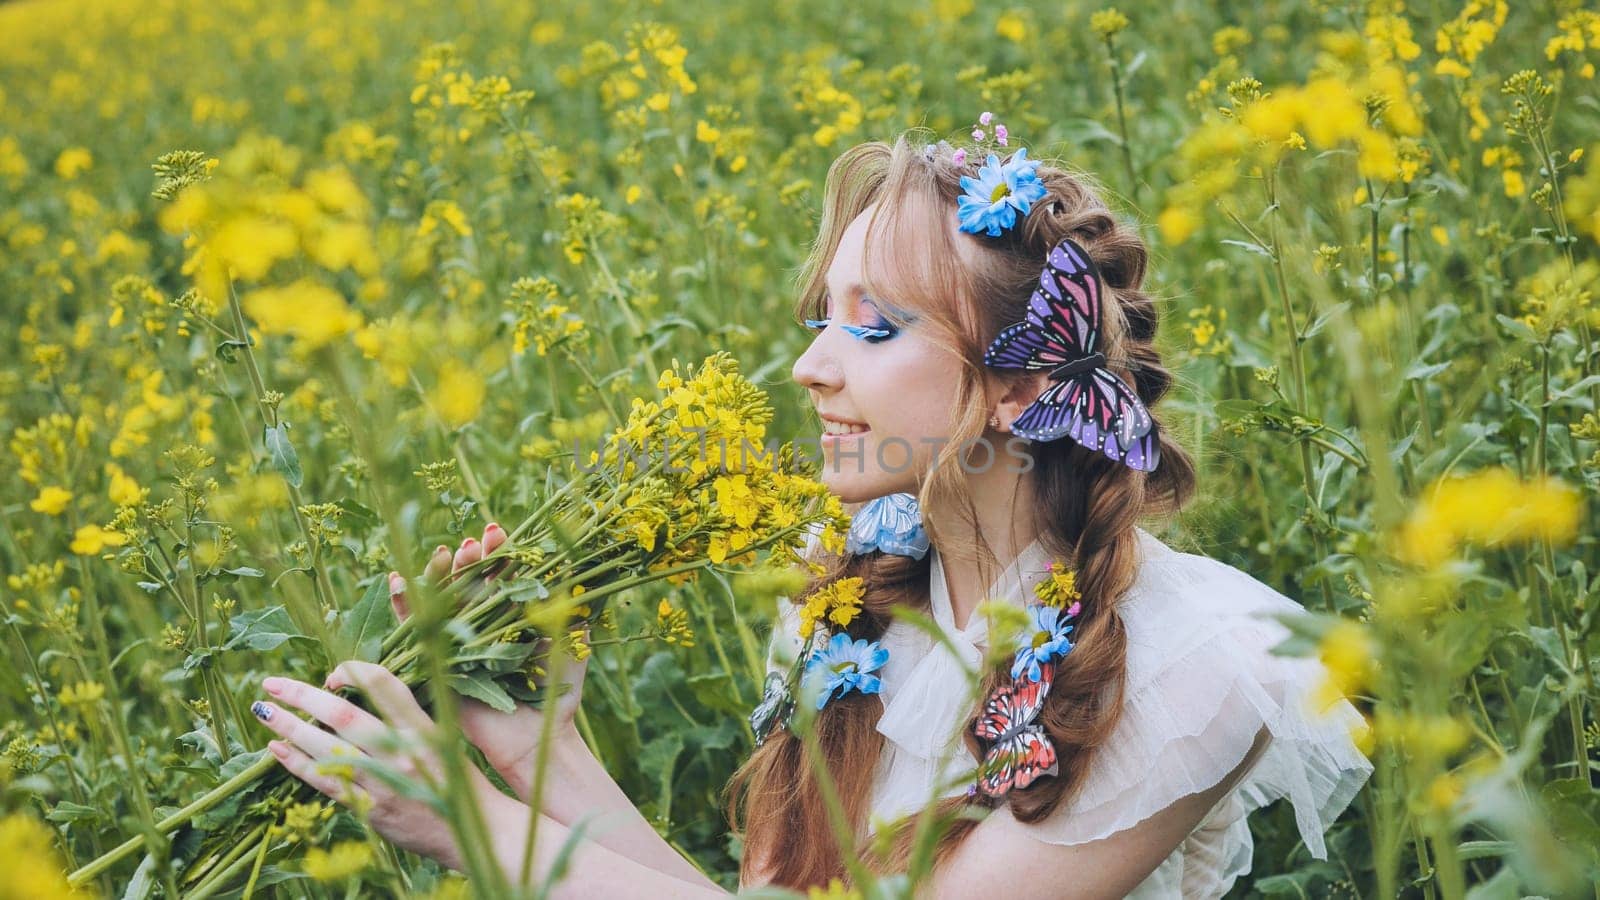 A young girl poses in a rapeseed field with a beautiful hairdo of flowers and butterflies